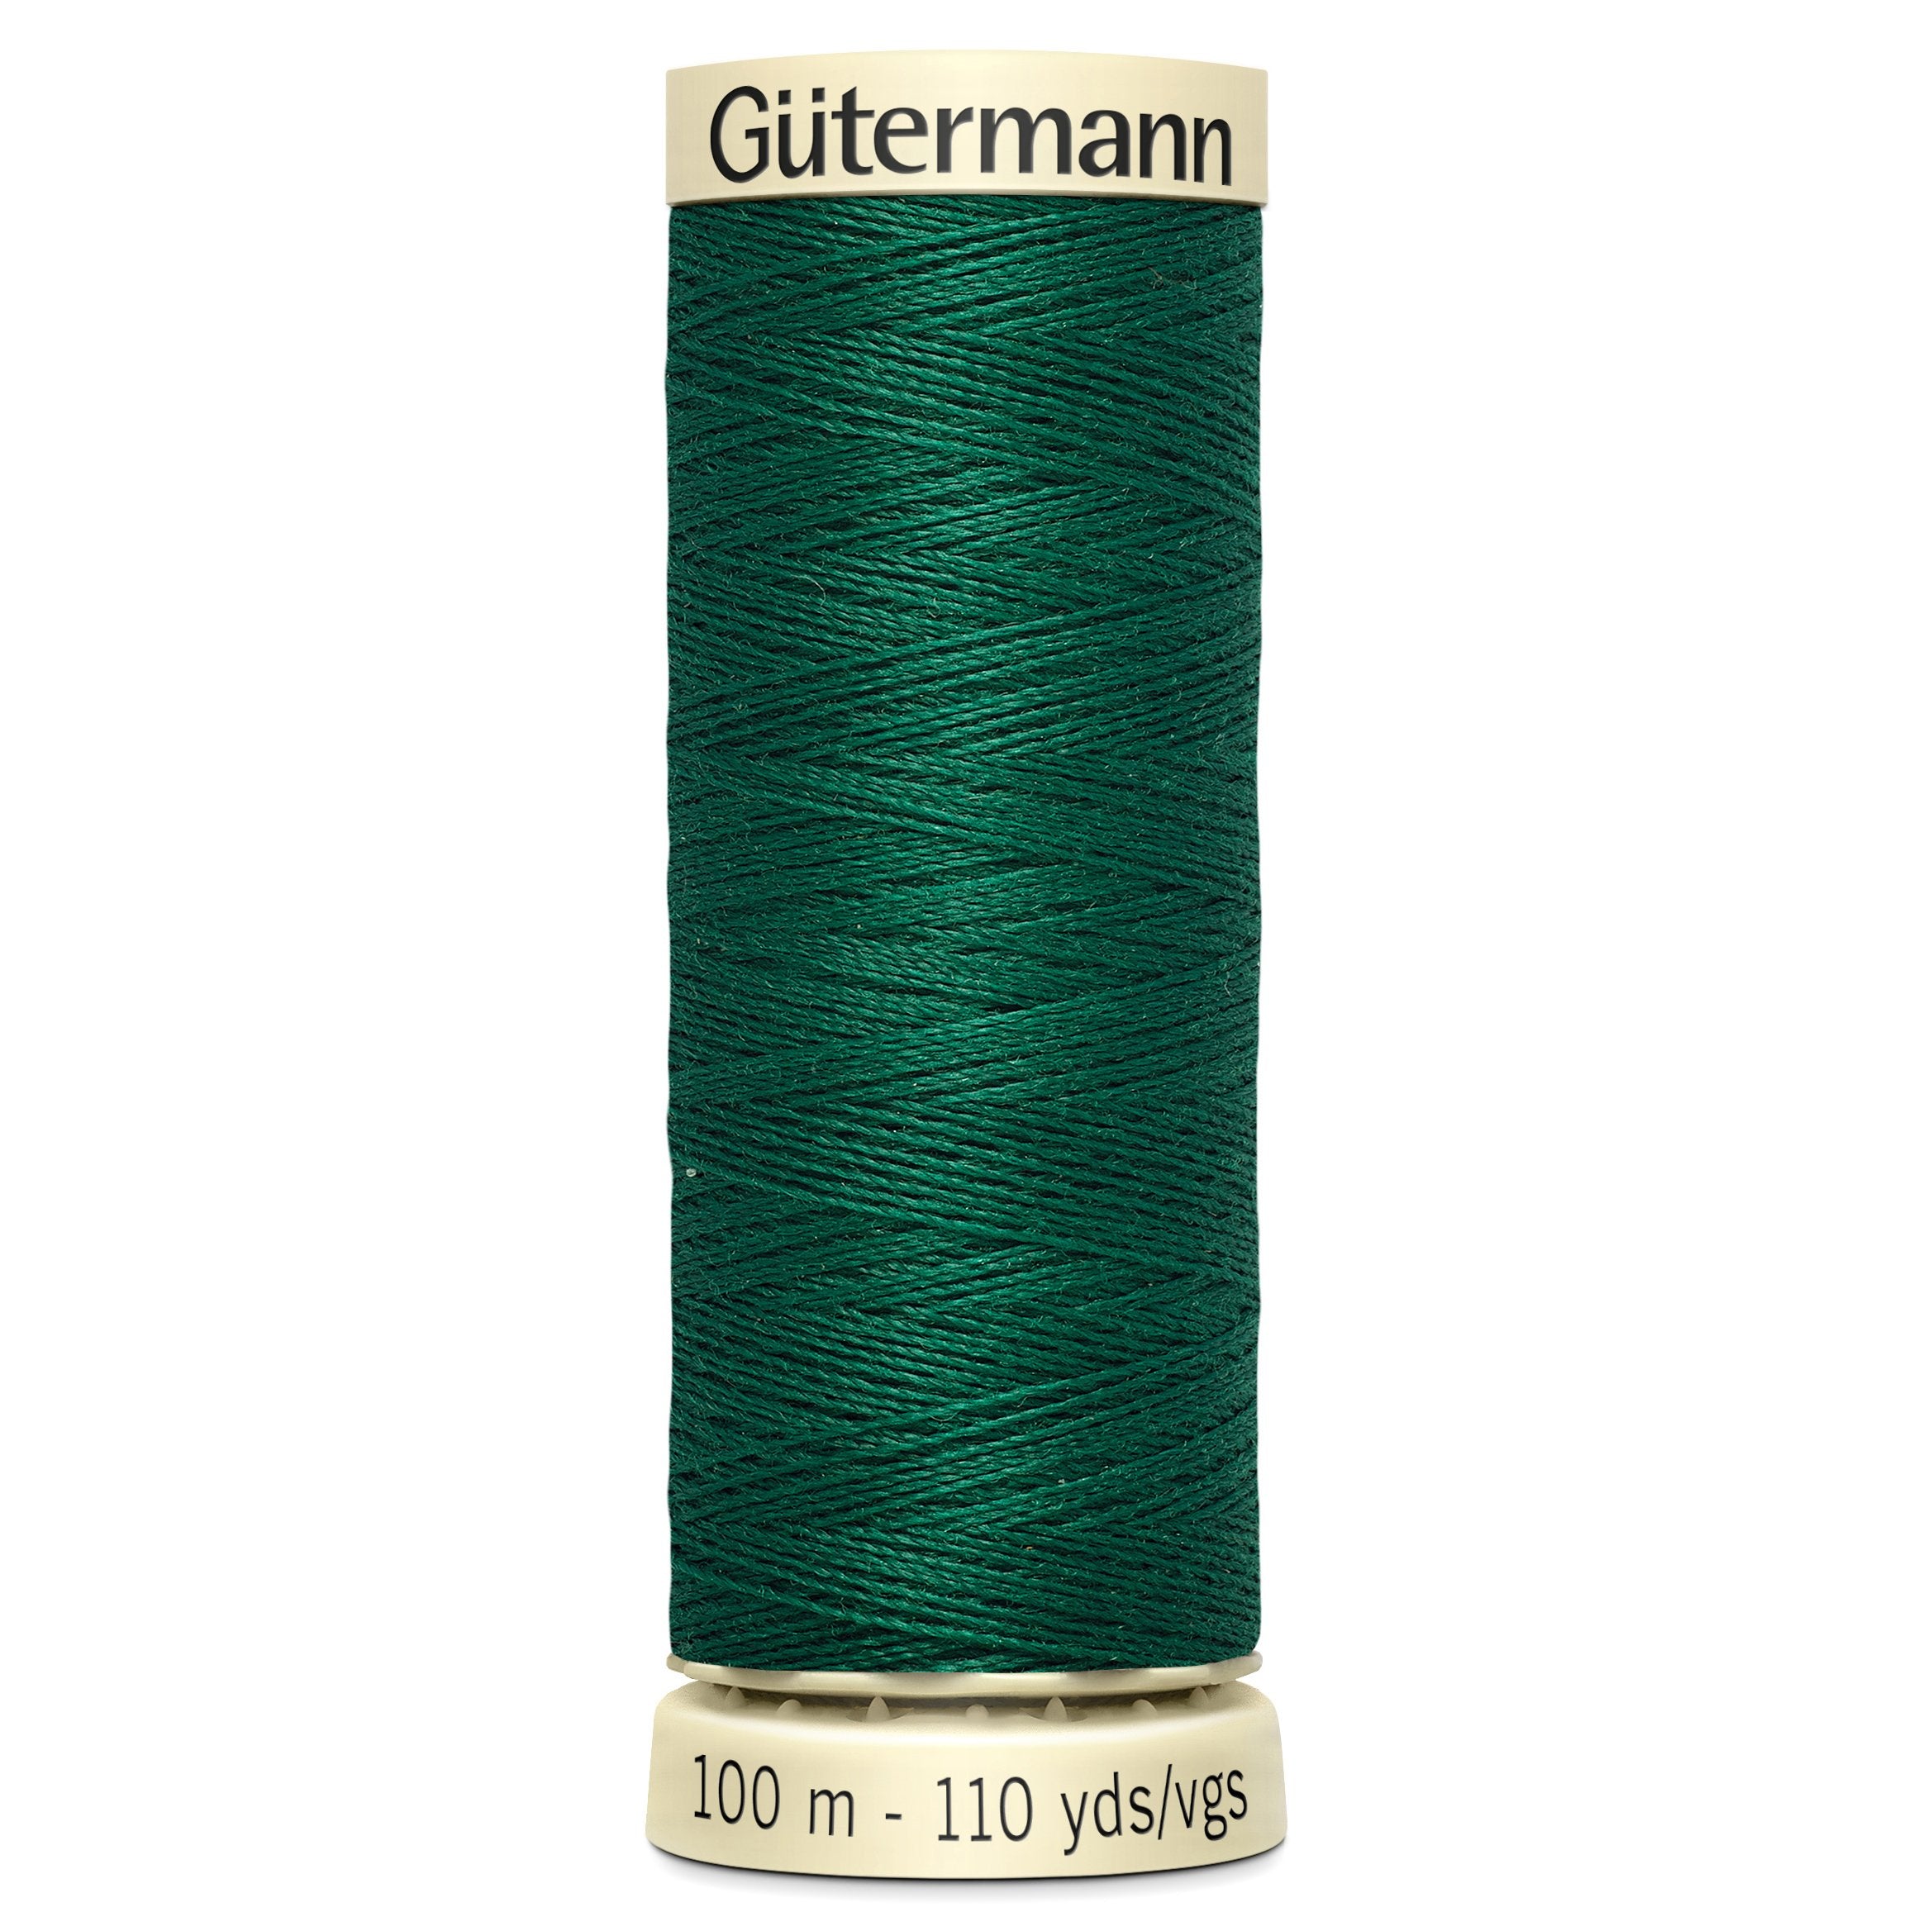 Gutermann Sew All Thread colour 403 Dark Green from Jaycotts Sewing Supplies